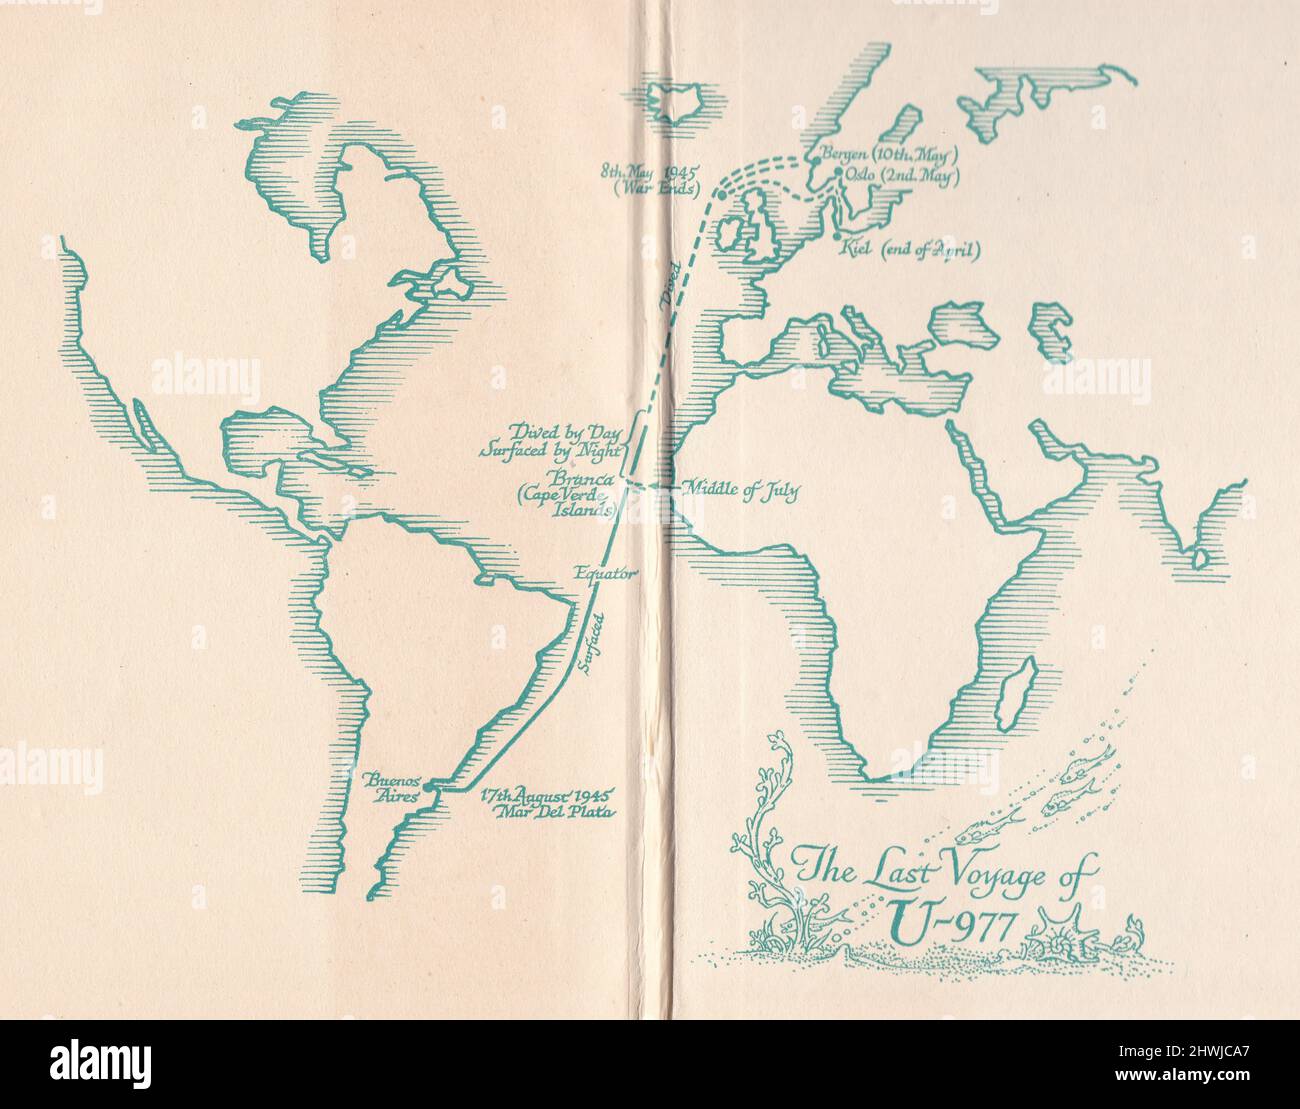 From the book U-Boat 977 by Heinz Schaeffer - Map of the last voyage of U-977. Stock Photo